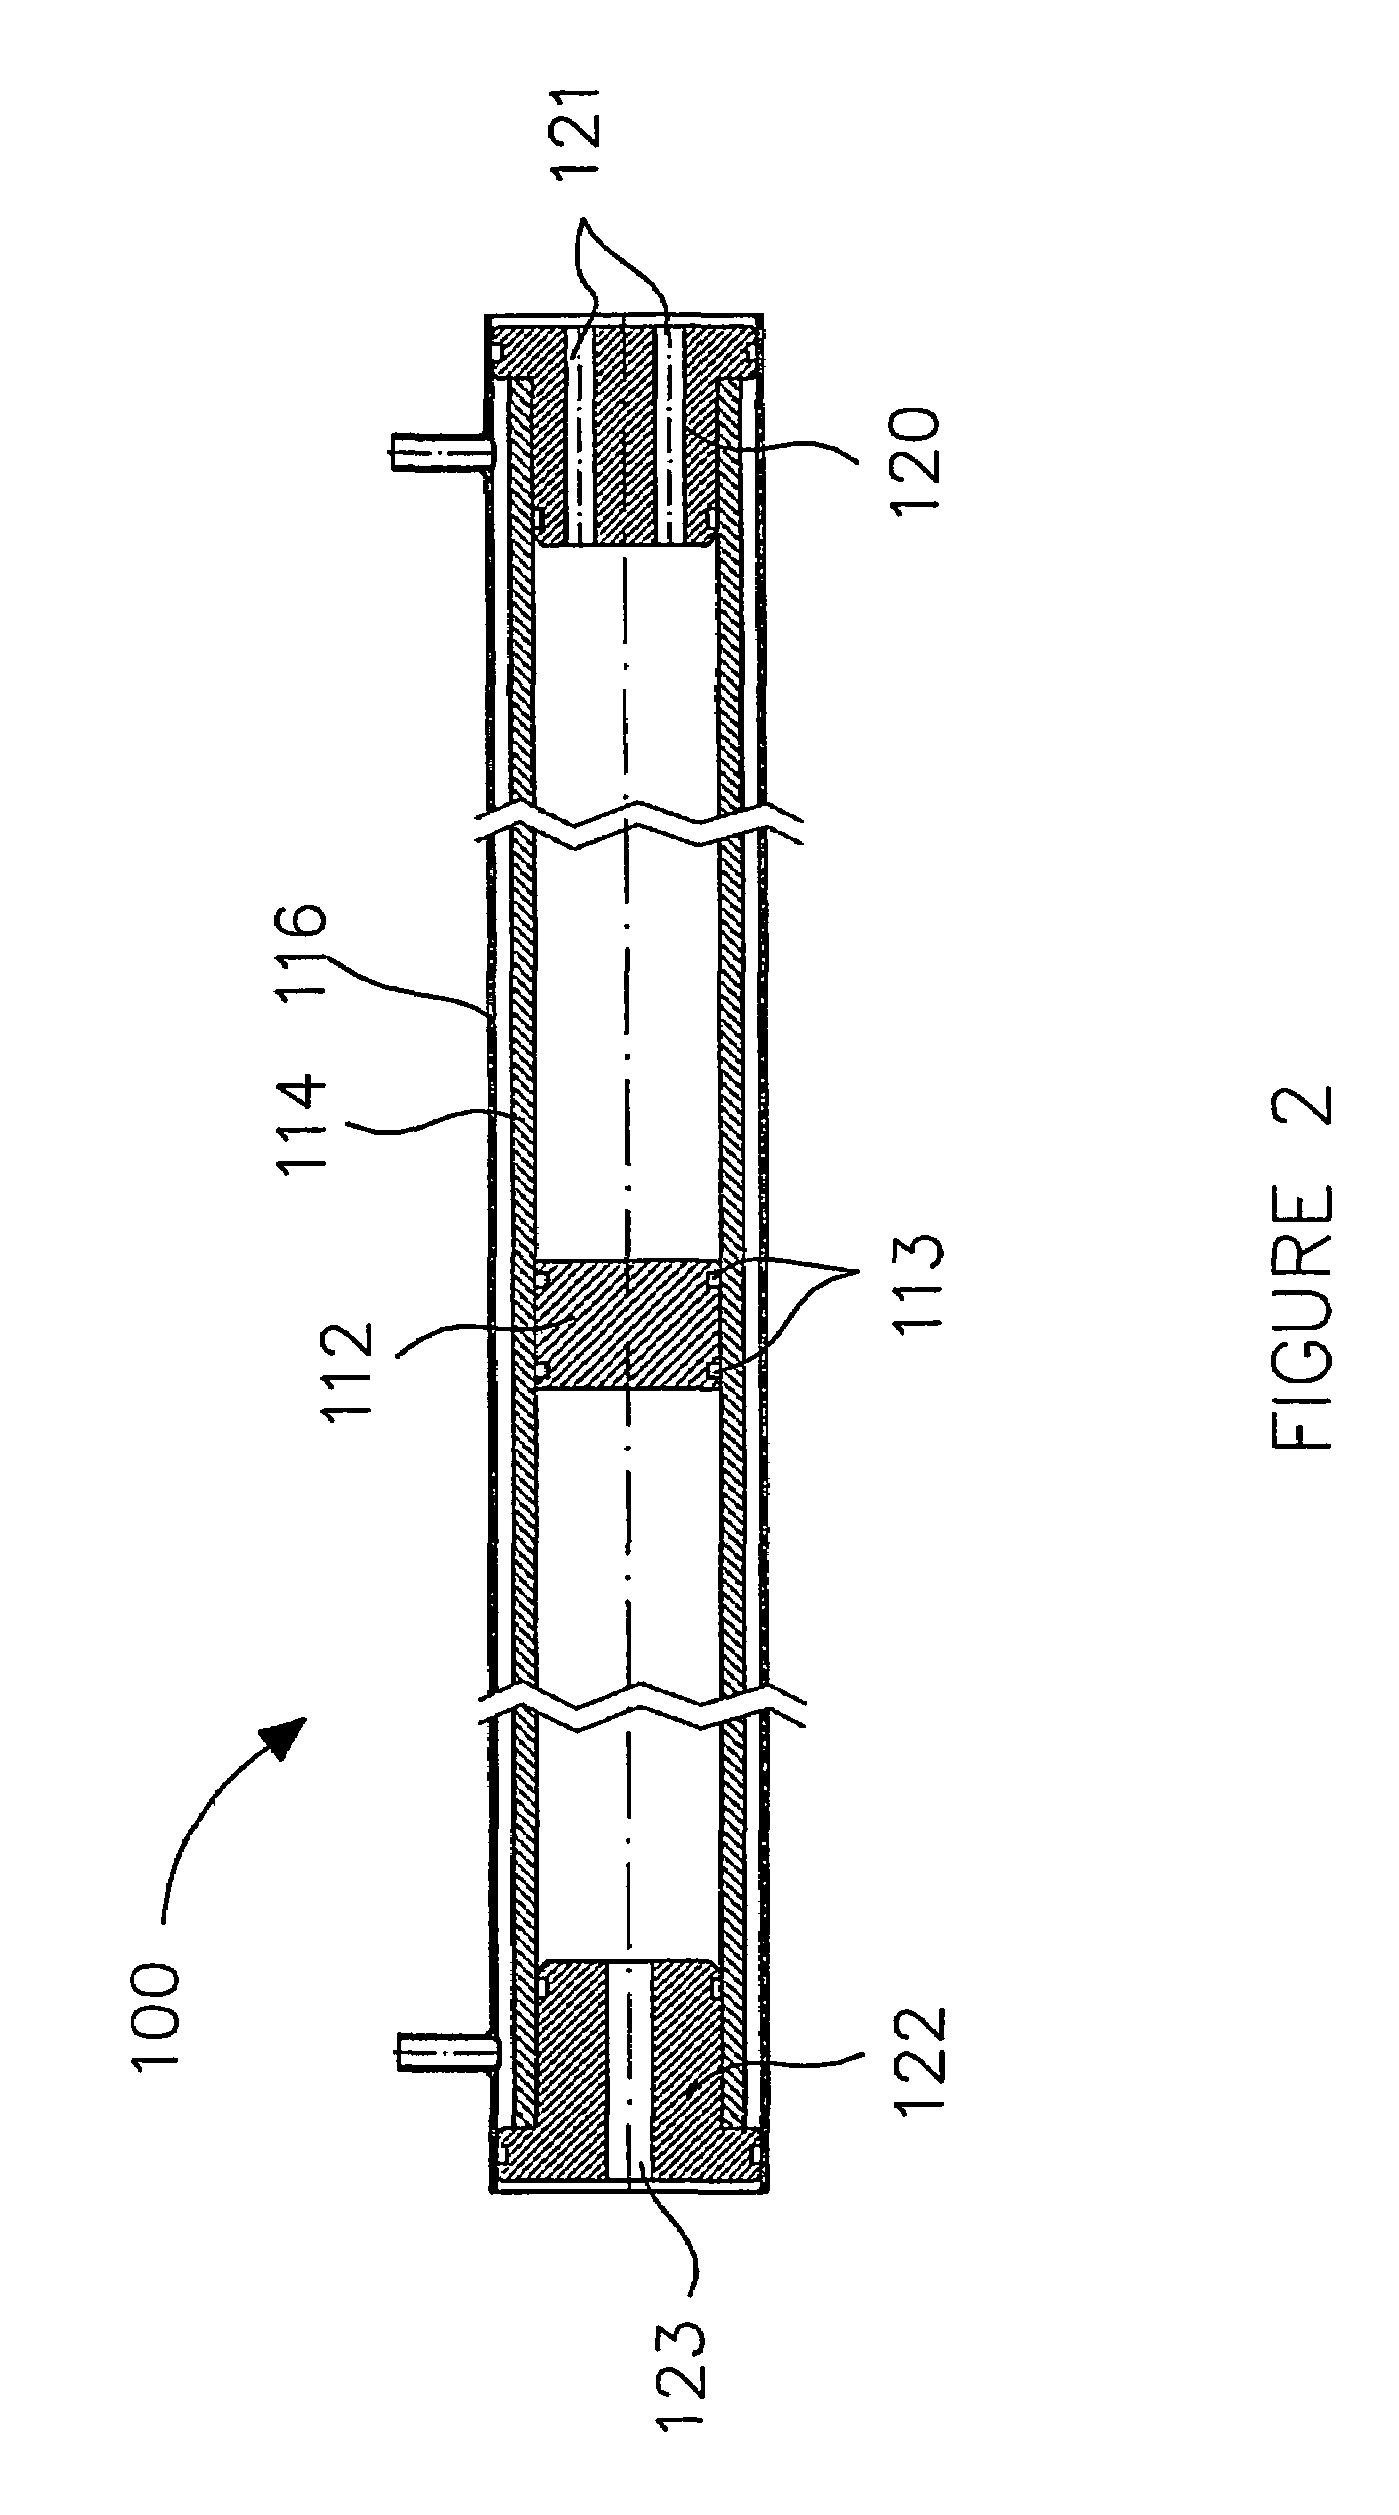 Method and apparatus for compressing a gas to a high pressure